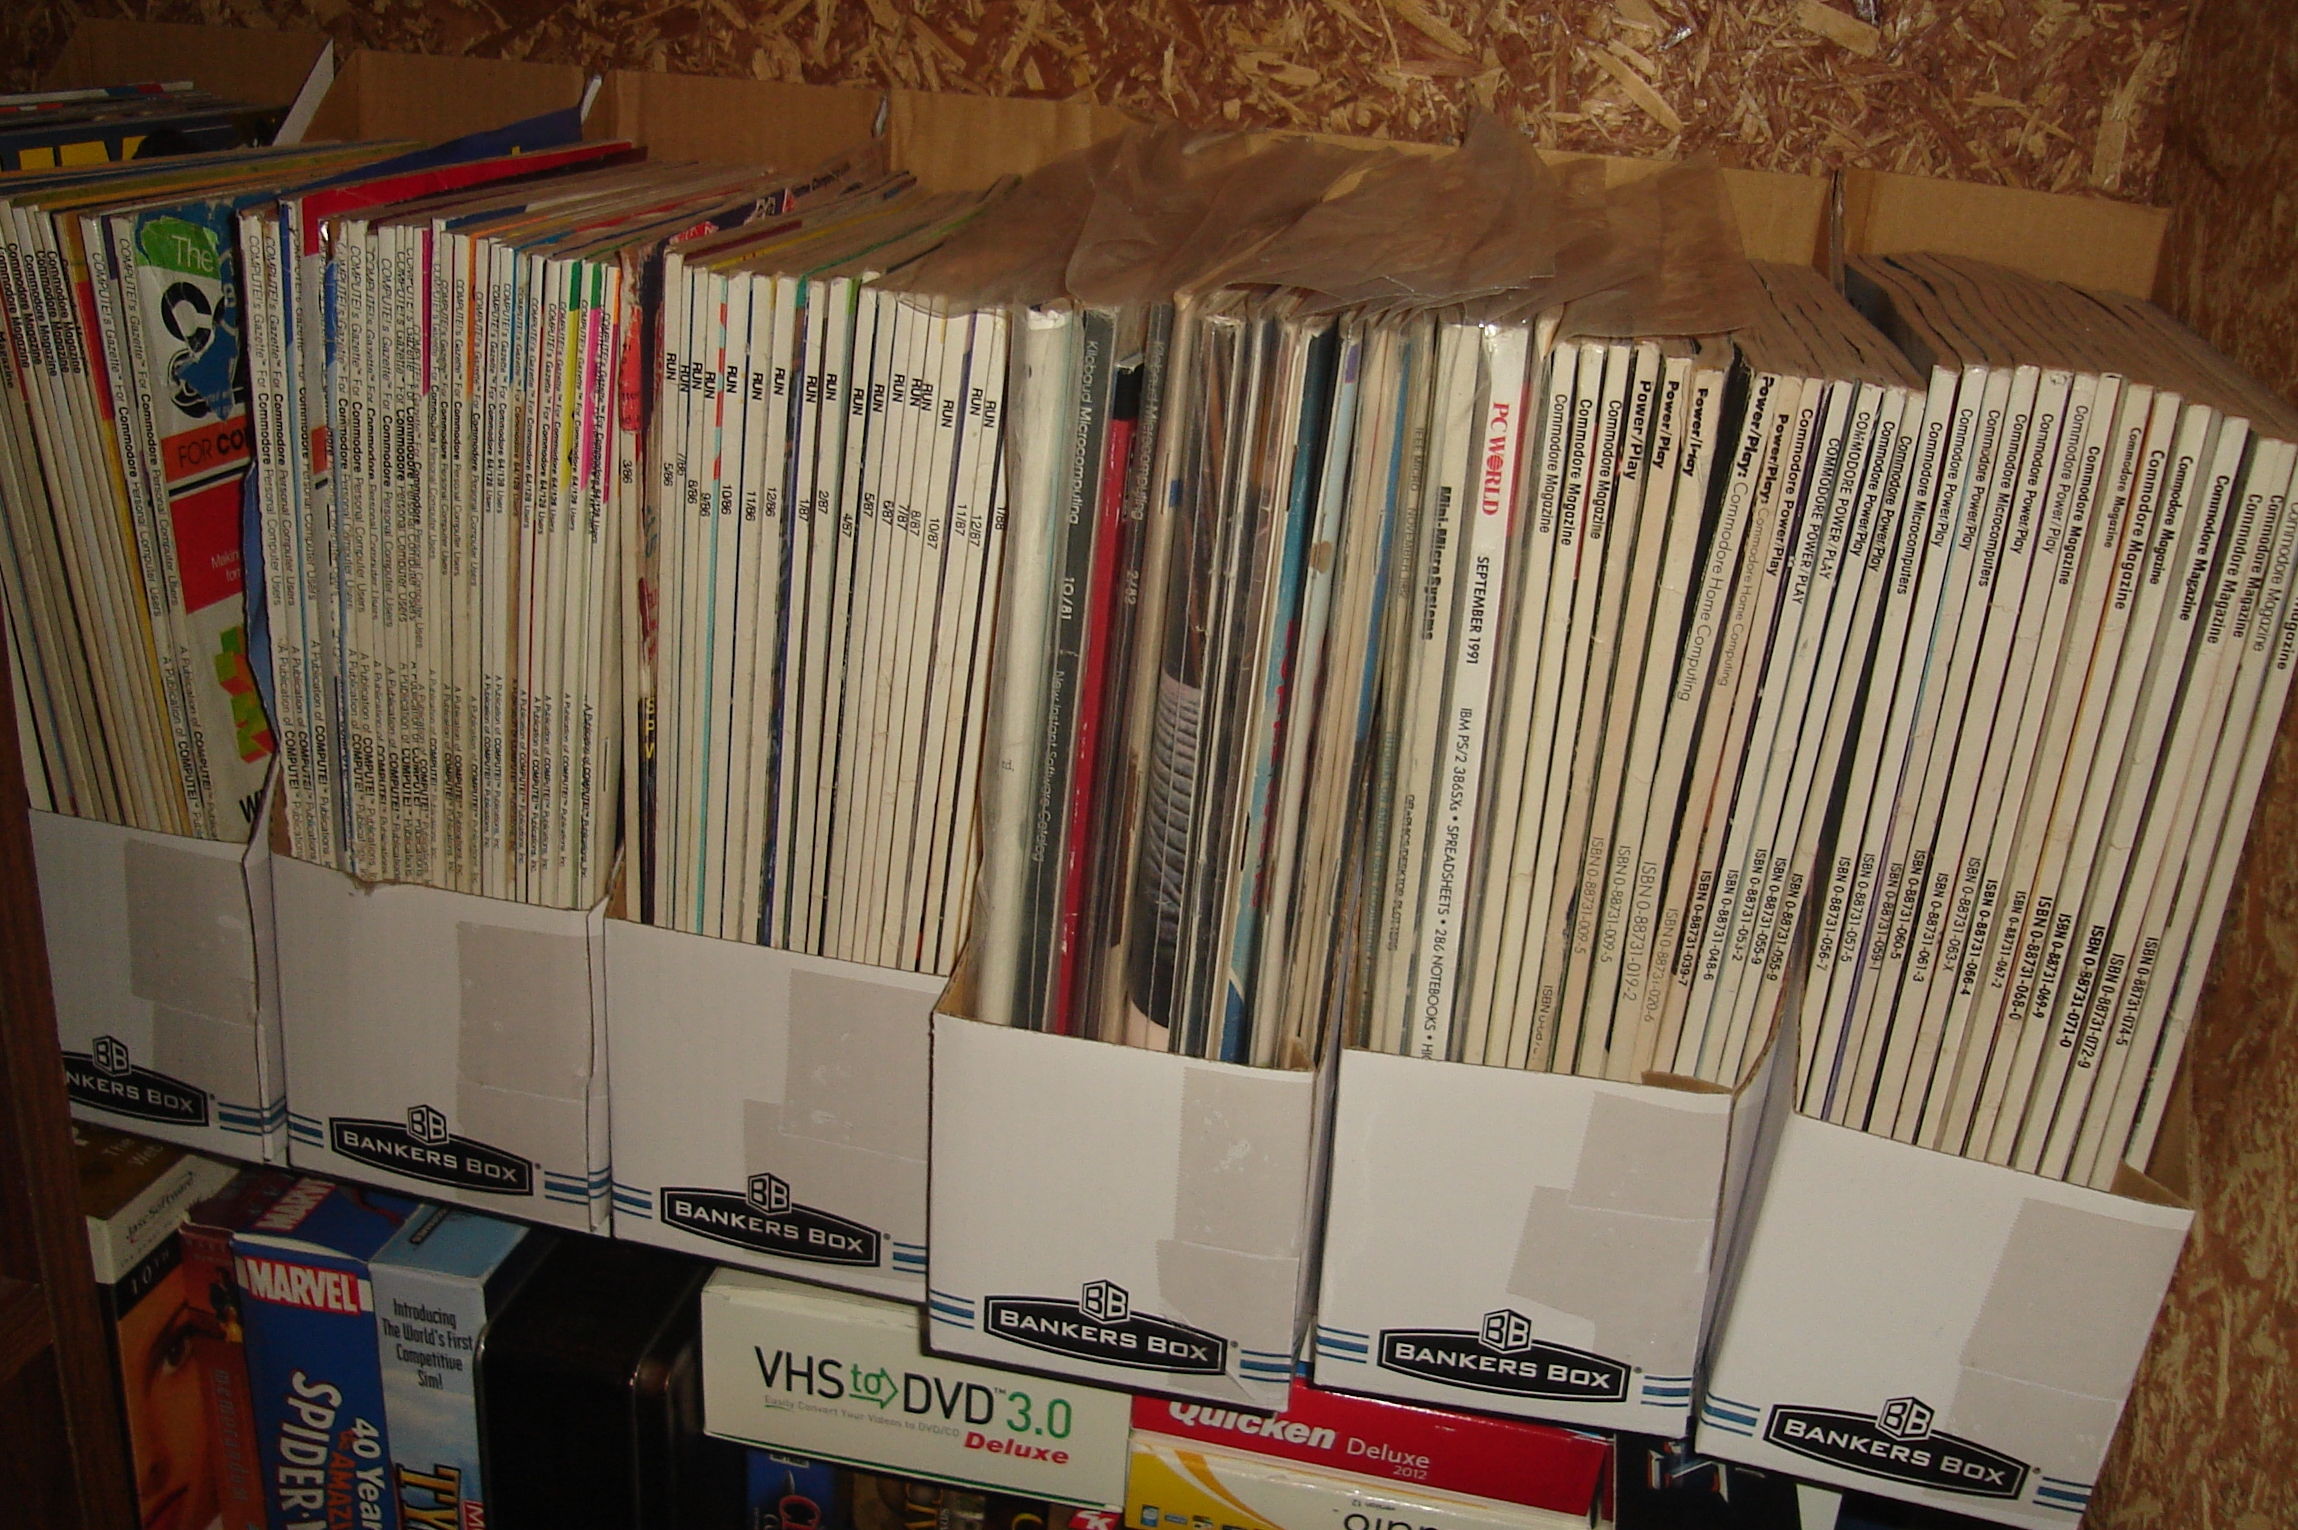 Old computer magazines